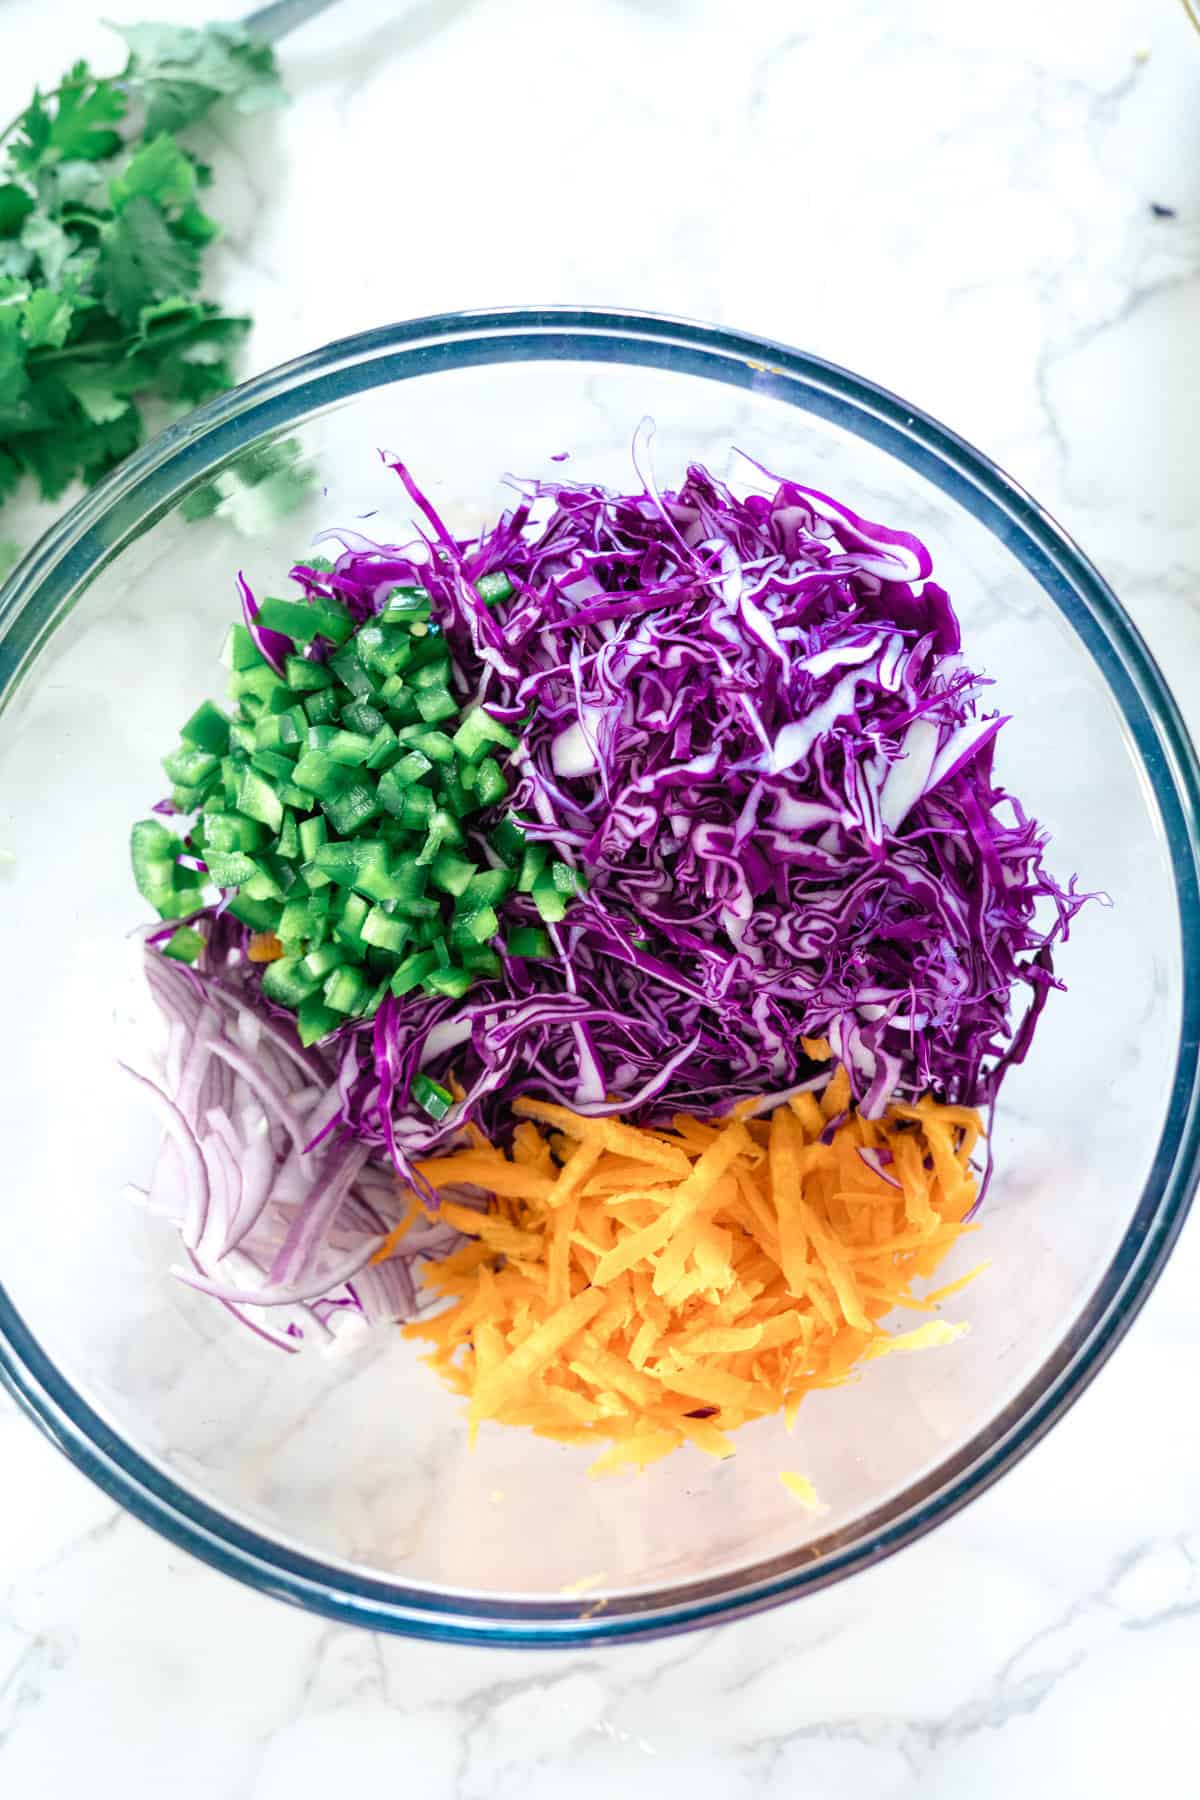 Purple cabbage slaw ingredients in a glass bowl.